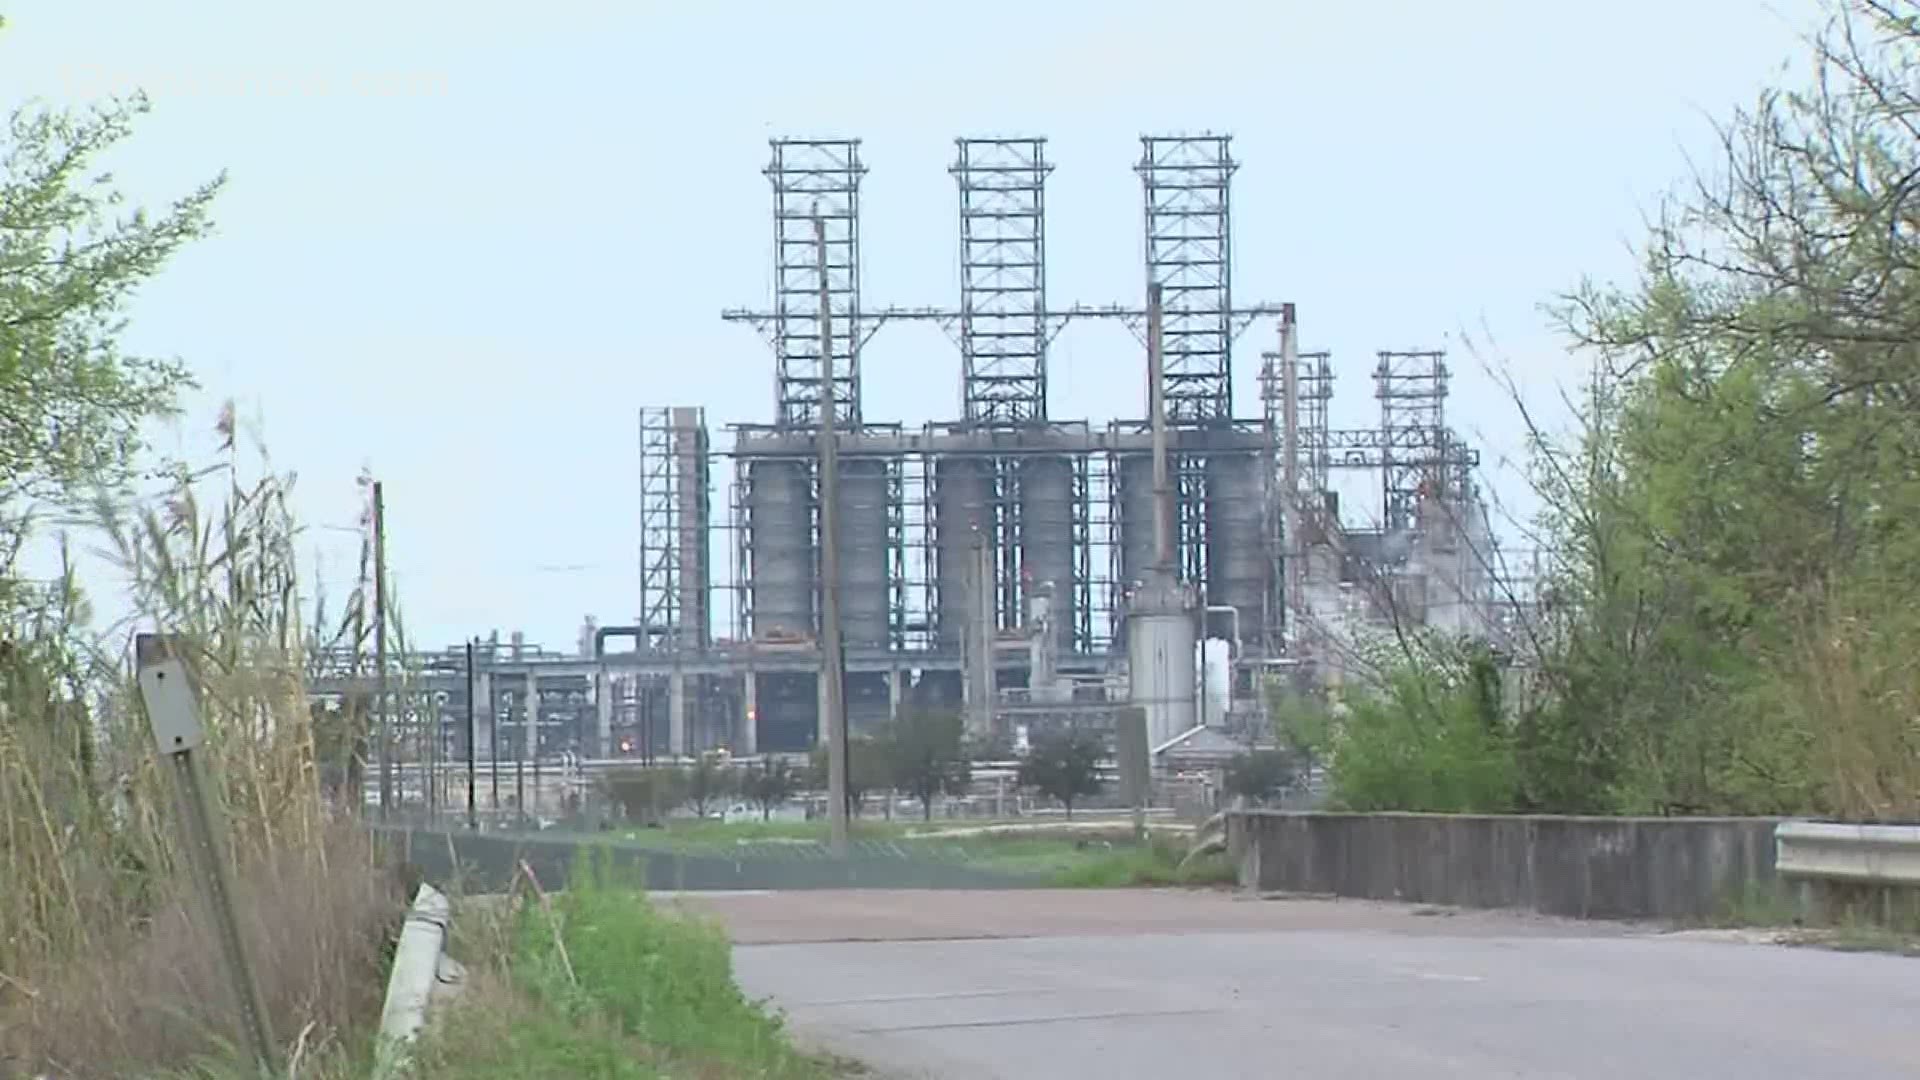 Many coastal communities in Texas are home to refineries and various chemical facilities that could pose dangers from tropical weather